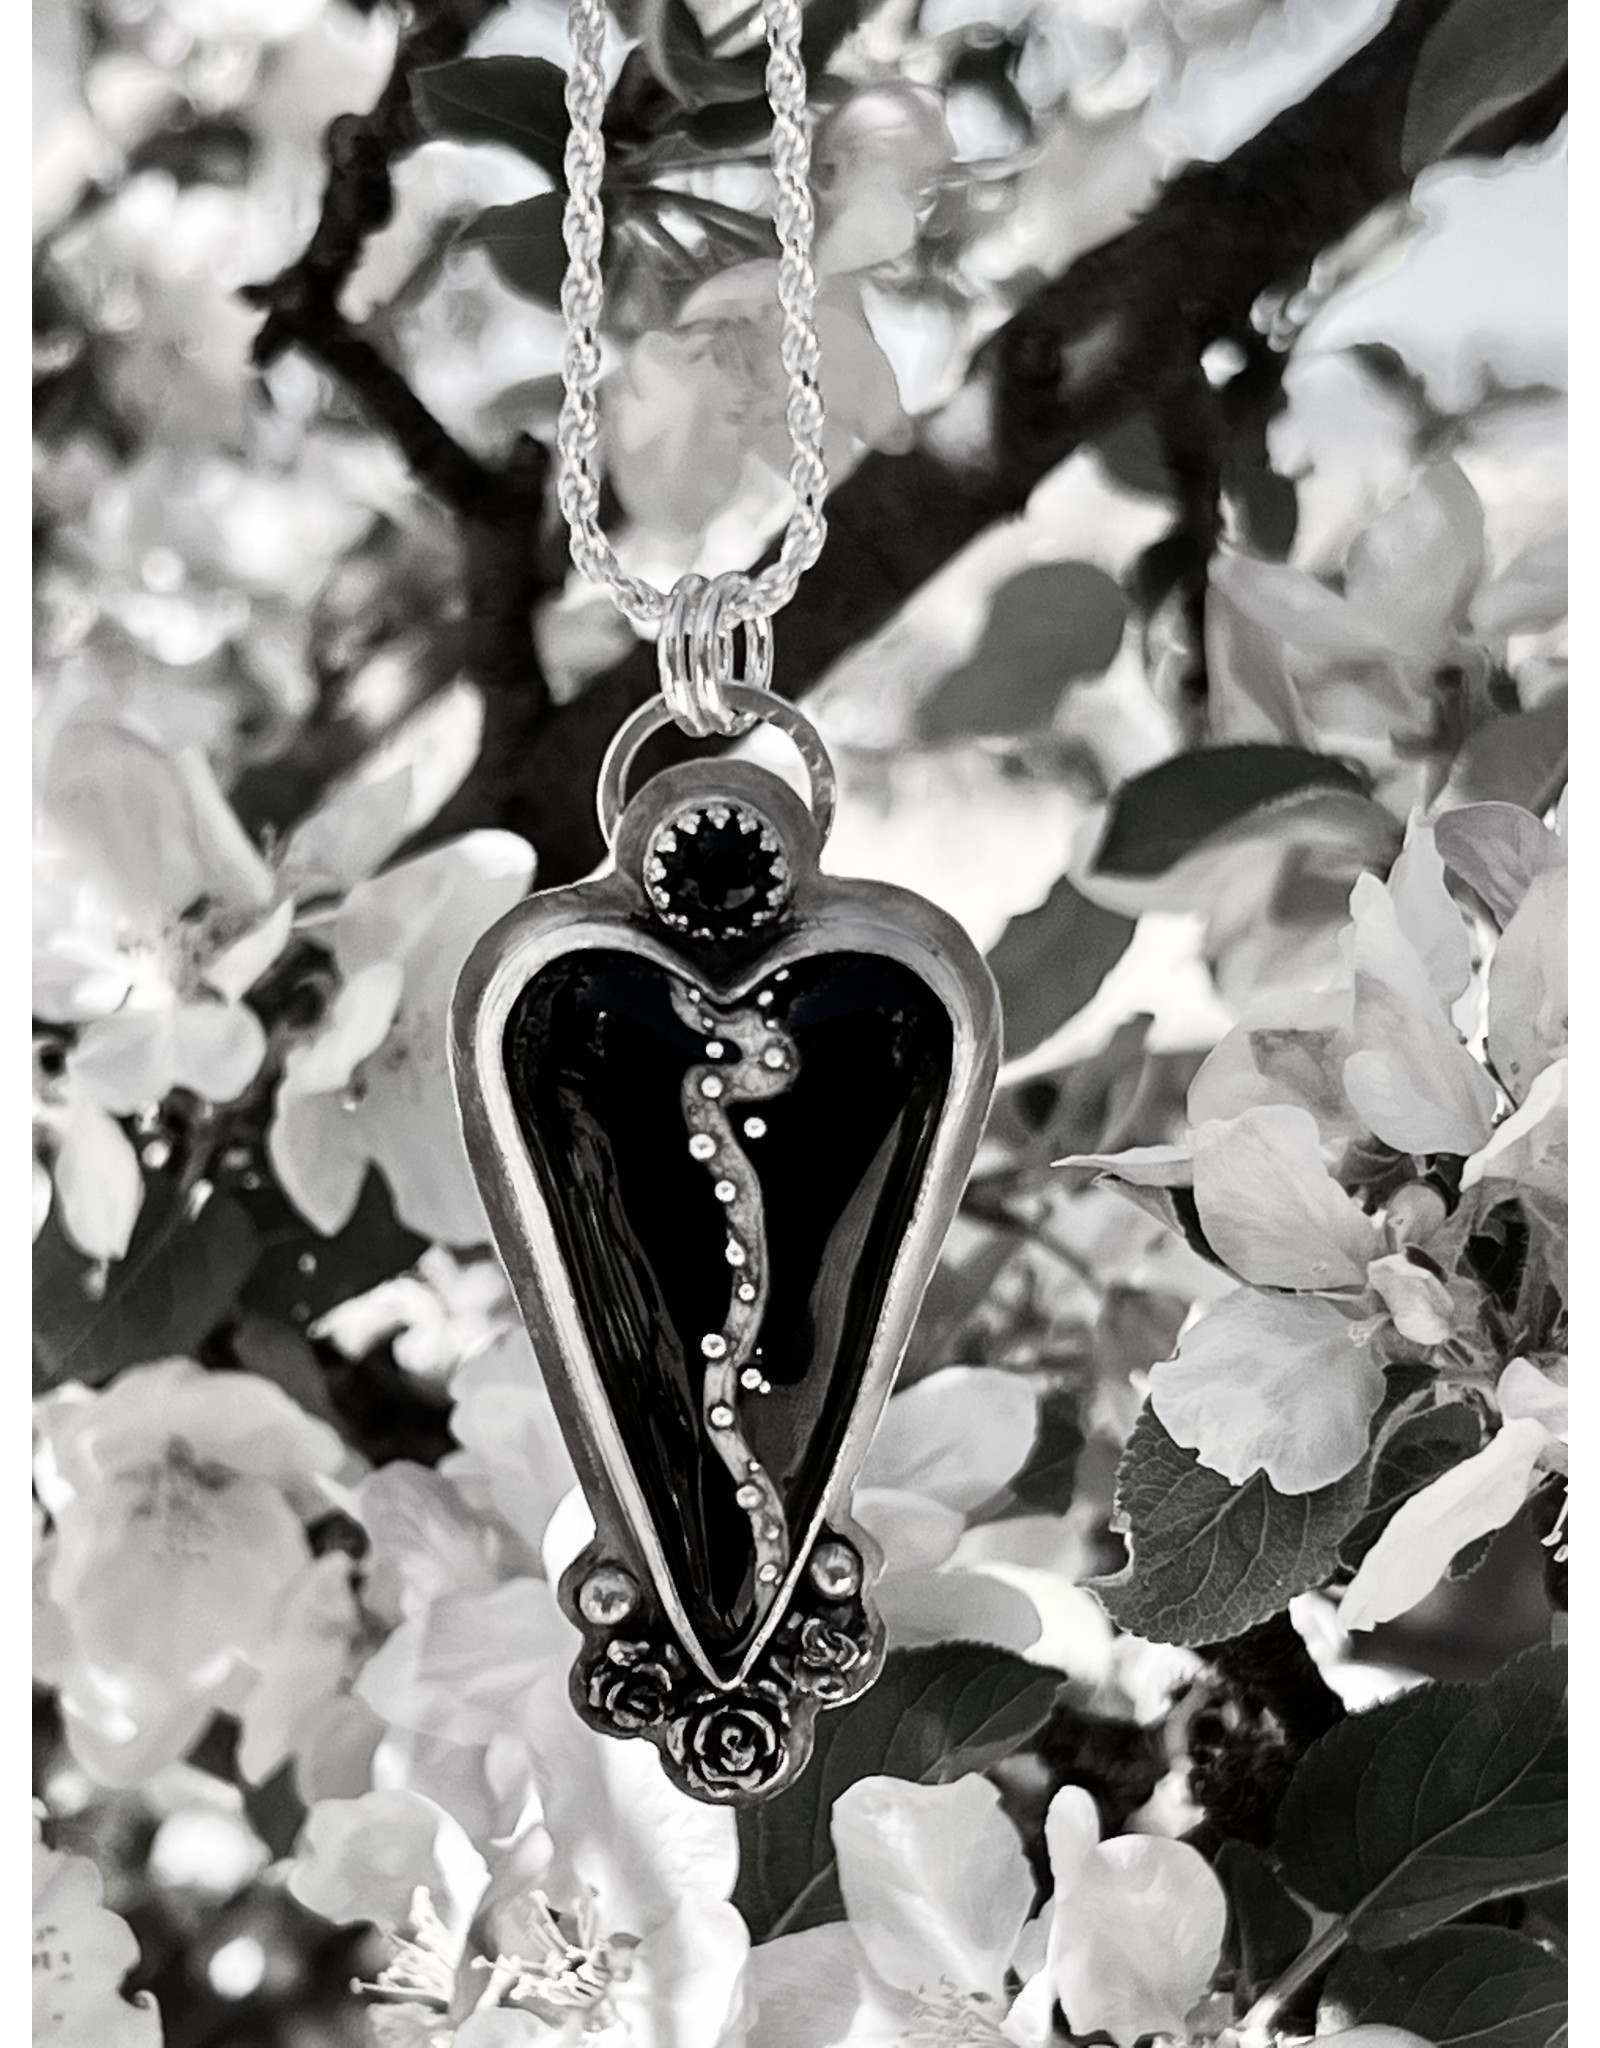 Annette Colby - Jeweler Black Heart Lampwork w/3 Roses Necklace  - Annette Colby